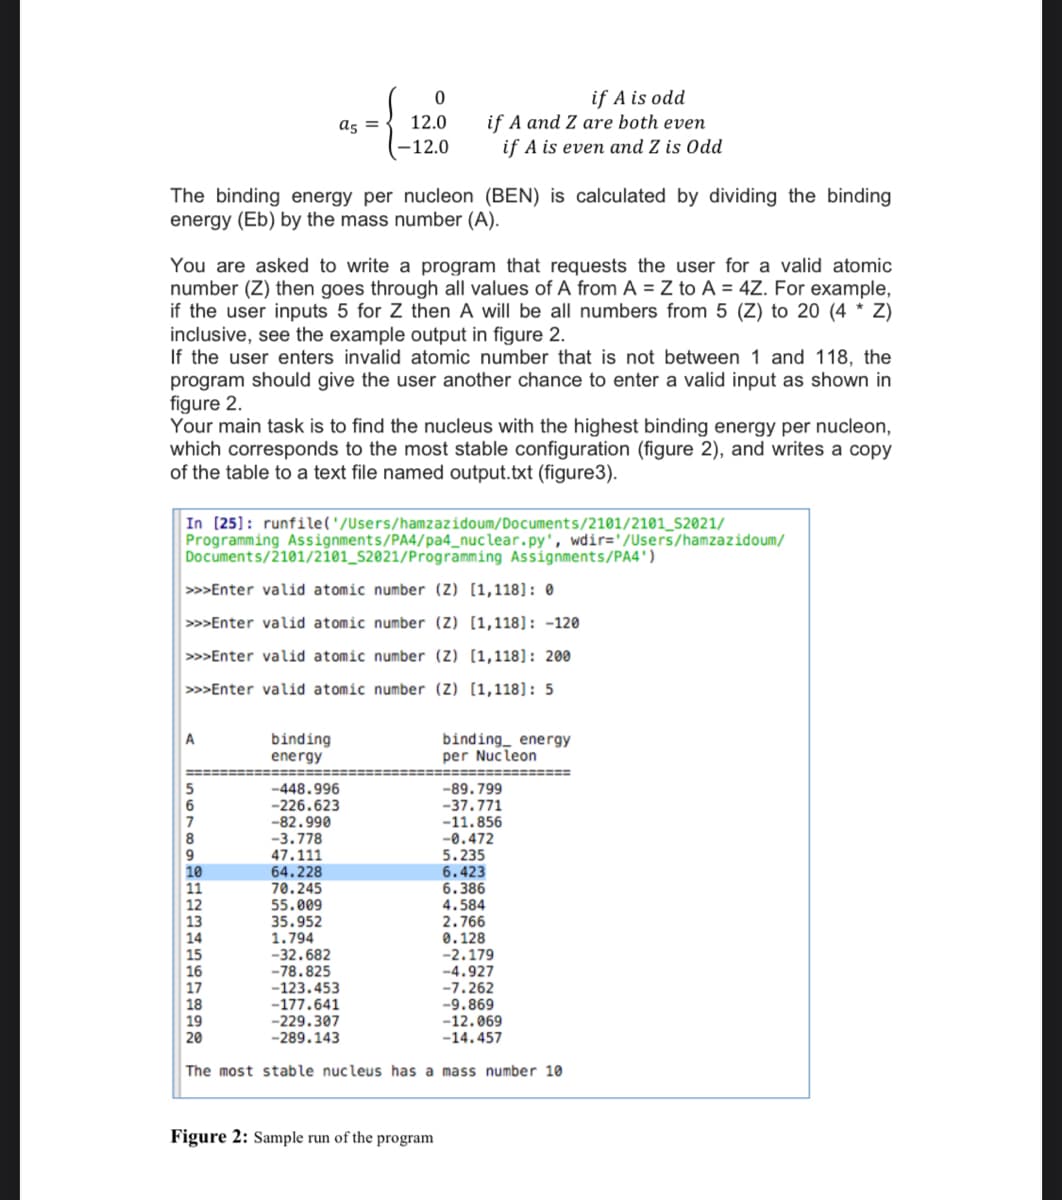 if A is odd
if A and Z are both even
as =
12.0
-12.0
if A is even and Z is Odd
The binding energy per nucleon (BEN) is calculated by dividing the binding
energy (Eb) by the mass number (A).
You are asked to write a program that requests the user for a valid atomic
number (Z) then goes through all values of A from A = Z to A = 4Z. For example,
if the user inputs 5 for Z then A will be all numbers from 5 (Z) to 20 (4 * Z)
inclusive, see the example output in figure 2.
If the user enters invalid atomic number that is not between 1 and 118, the
program should give the user another chance to enter a valid input as shown in
figure 2.
Your main task is to find the nucleus with the highest binding energy per nucleon,
which corresponds to the most stable configuration (figure 2), and writes a copy
of the table to a text file named output.txt (figure3).
In (25]: runfile('/Users/hamzazidoum/Documents/2101/2101_S2021/
Programming Assignments/PA4/pa4_nuclear.py', wdir='/Users/hamzazidoum/
Documents/2101/2101_s2021/Programming Assignments/PA4')
>>Enter valid atomic number (Z) [1,118]: 0
>>Enter valid atomic number (Z) [1,118]: -120
>>Enter valid atomic number (Z) [1,118]: 200
>>>Enter valid atomic number (Z) [1,118]: 5
A
binding
energy
binding_ energy
per Nucleon
==============
-448.996
-226.623
-82.990
-89.799
-37.771
-11.856
-3.778
47.111
64.228
70.245
55.009
35.952
1.794
-32.682
-78.825
-123.453
-177.641
-229.307
-289.143
-0.472
5.235
6.423
6.386
4.584
2.766
0.128
-2.179
-4.927
-7.262
-9.869
-12.069
-14.457
20
The most stable nucleus has a mass number 10
Figure 2: Sample run of the program
